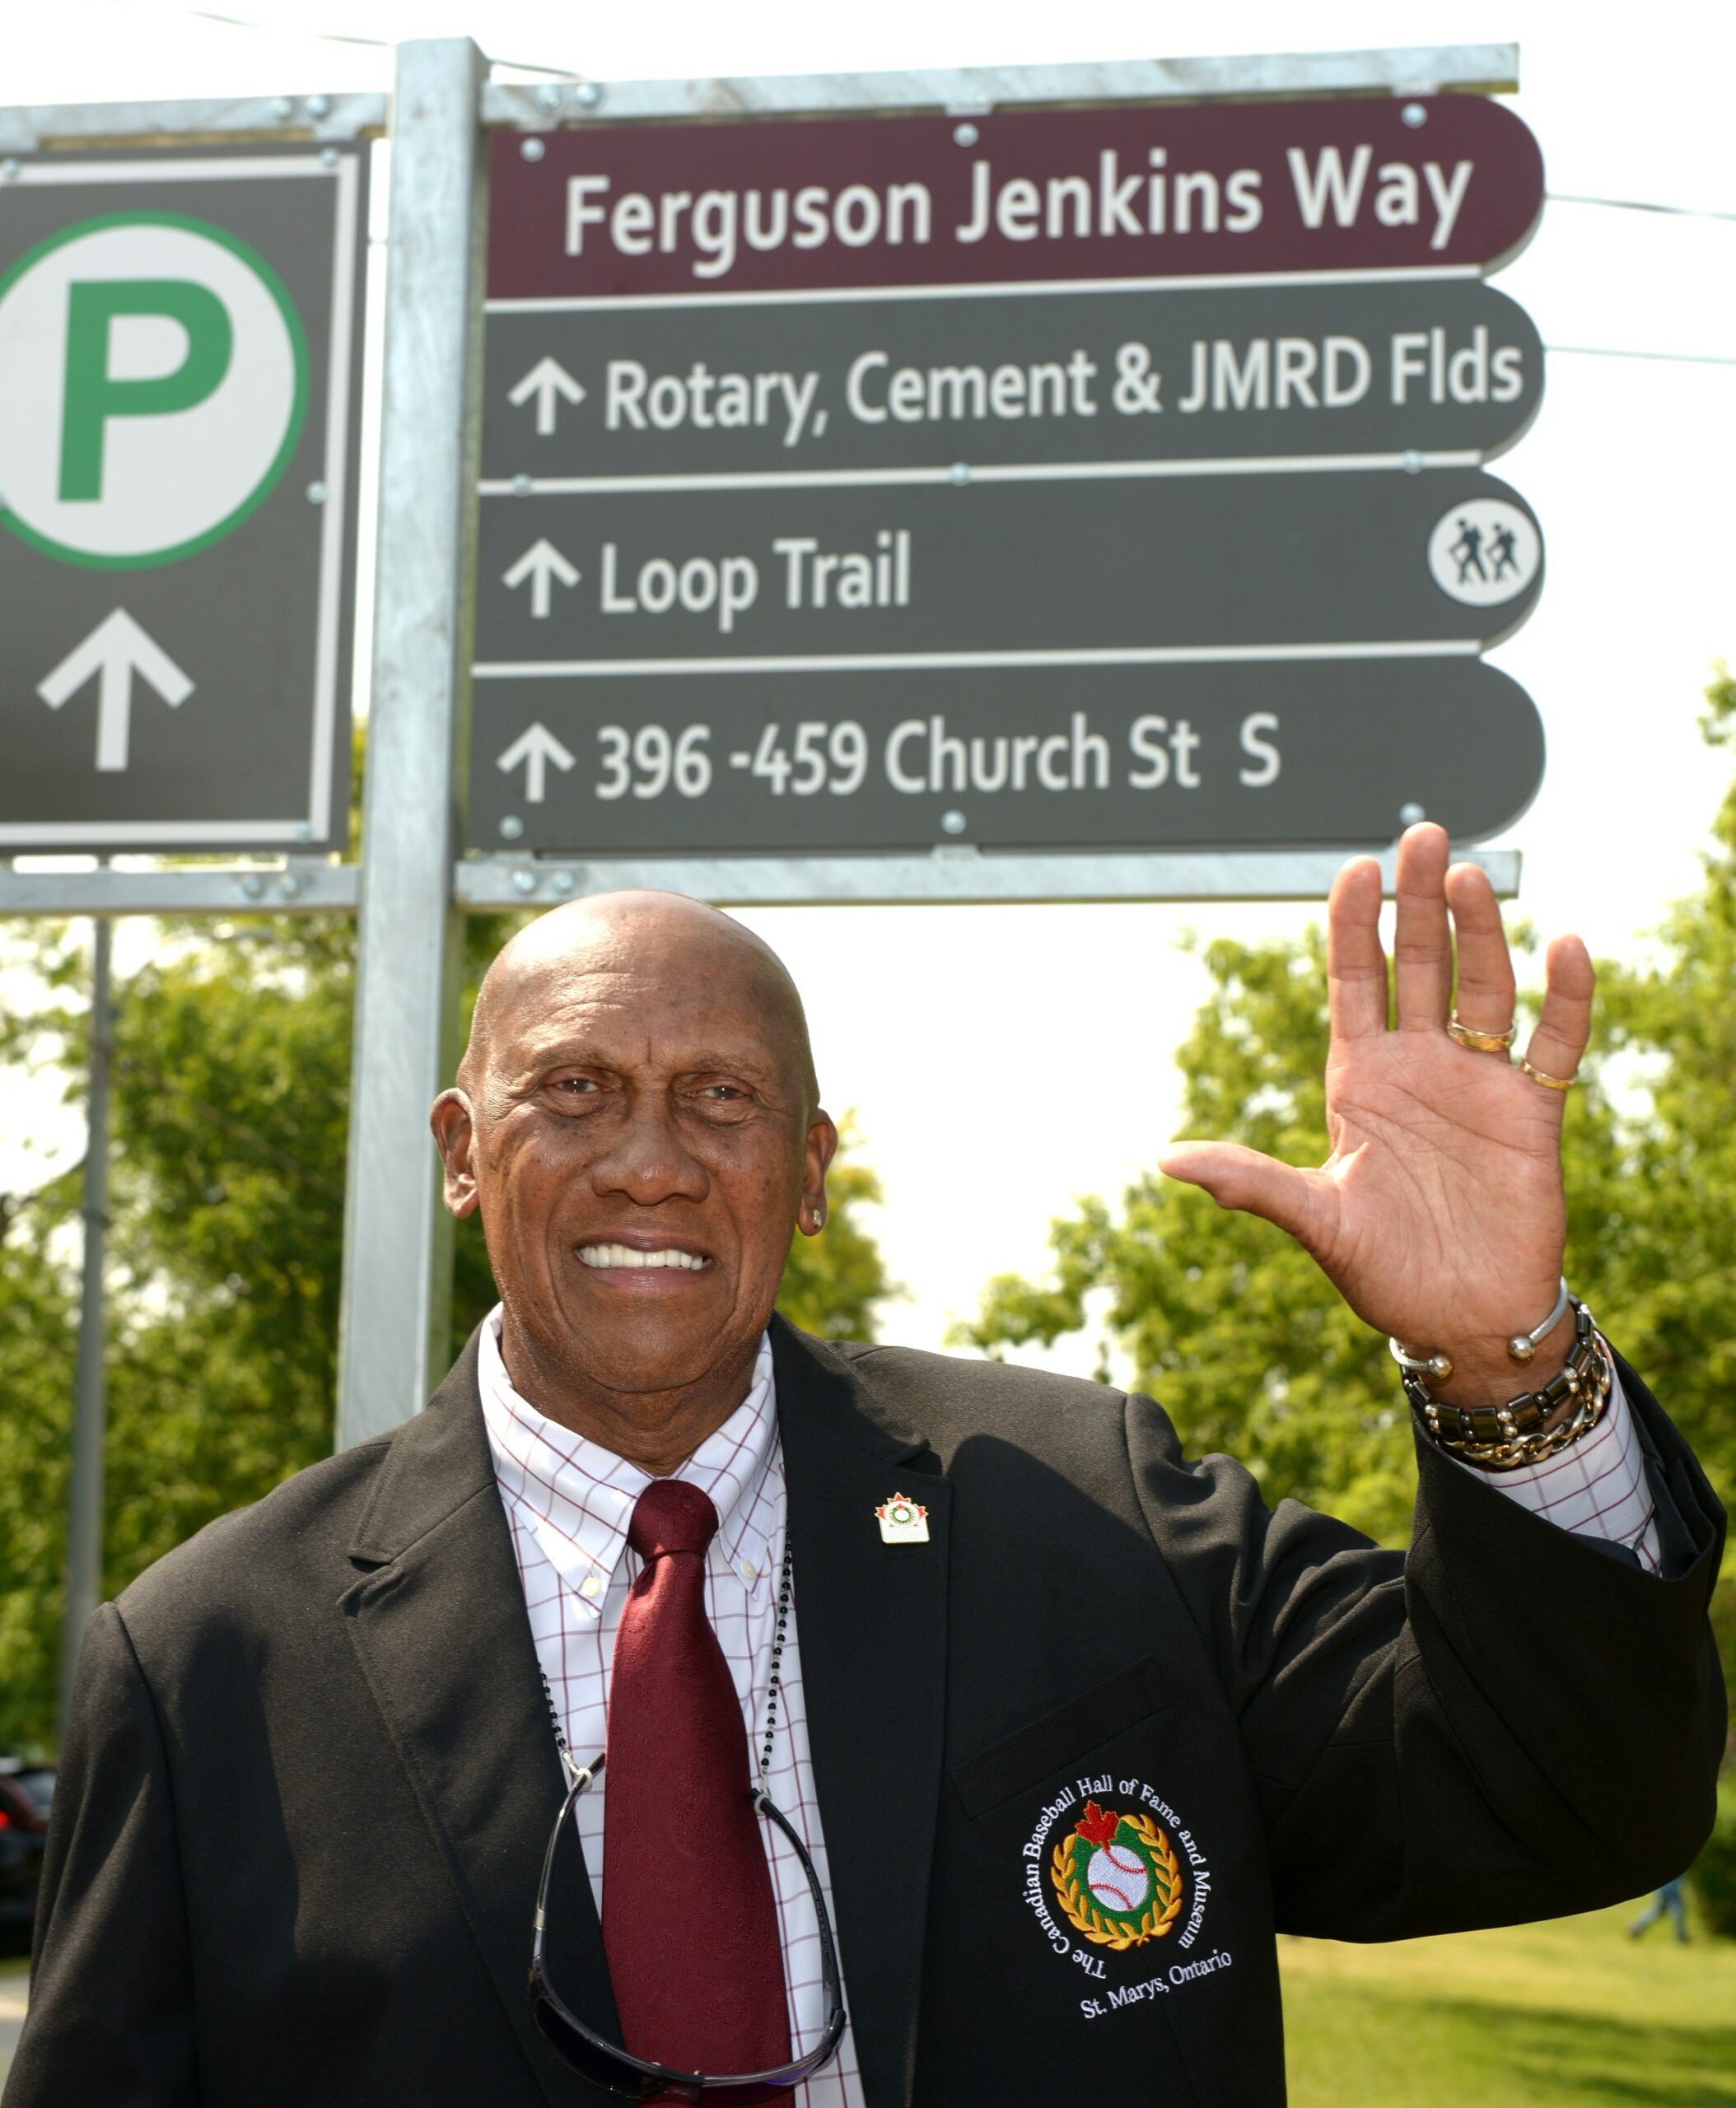 Canada's greatest baseball icon Ferguson Jenkins stands in front of a street named after him in front of the Canadian Baseball Hall of Fame and Museum in St. Marys, Ontario (photo courtesy of the museum).